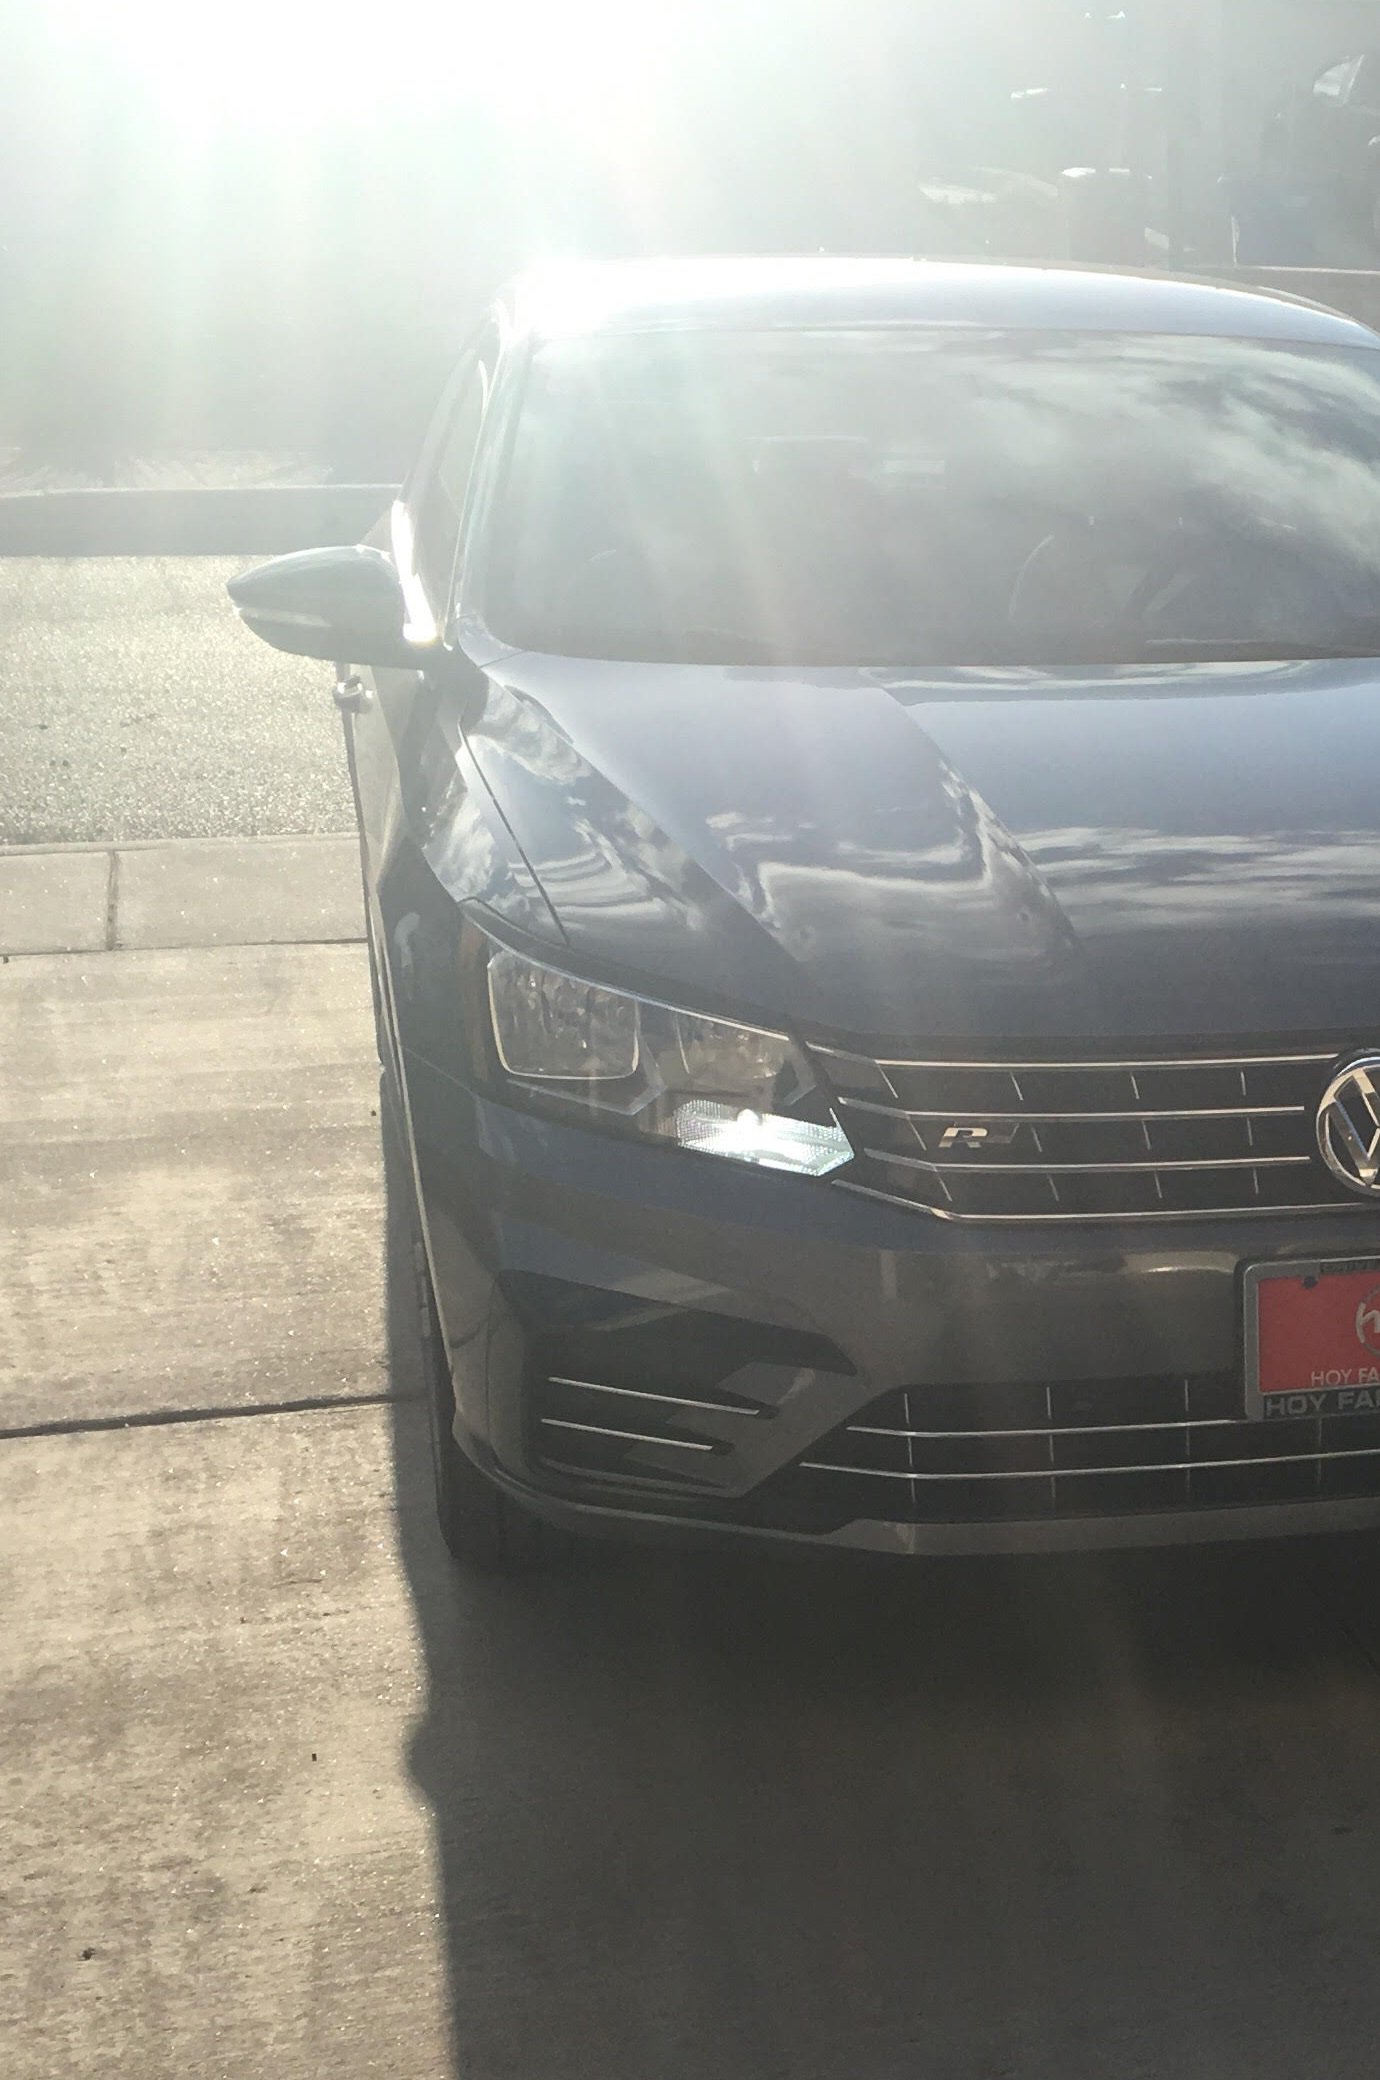 Image of Front Turn / DRL combo in white or amber for Volkswagen Passat B7 2016+ models with PWY24W bulbs